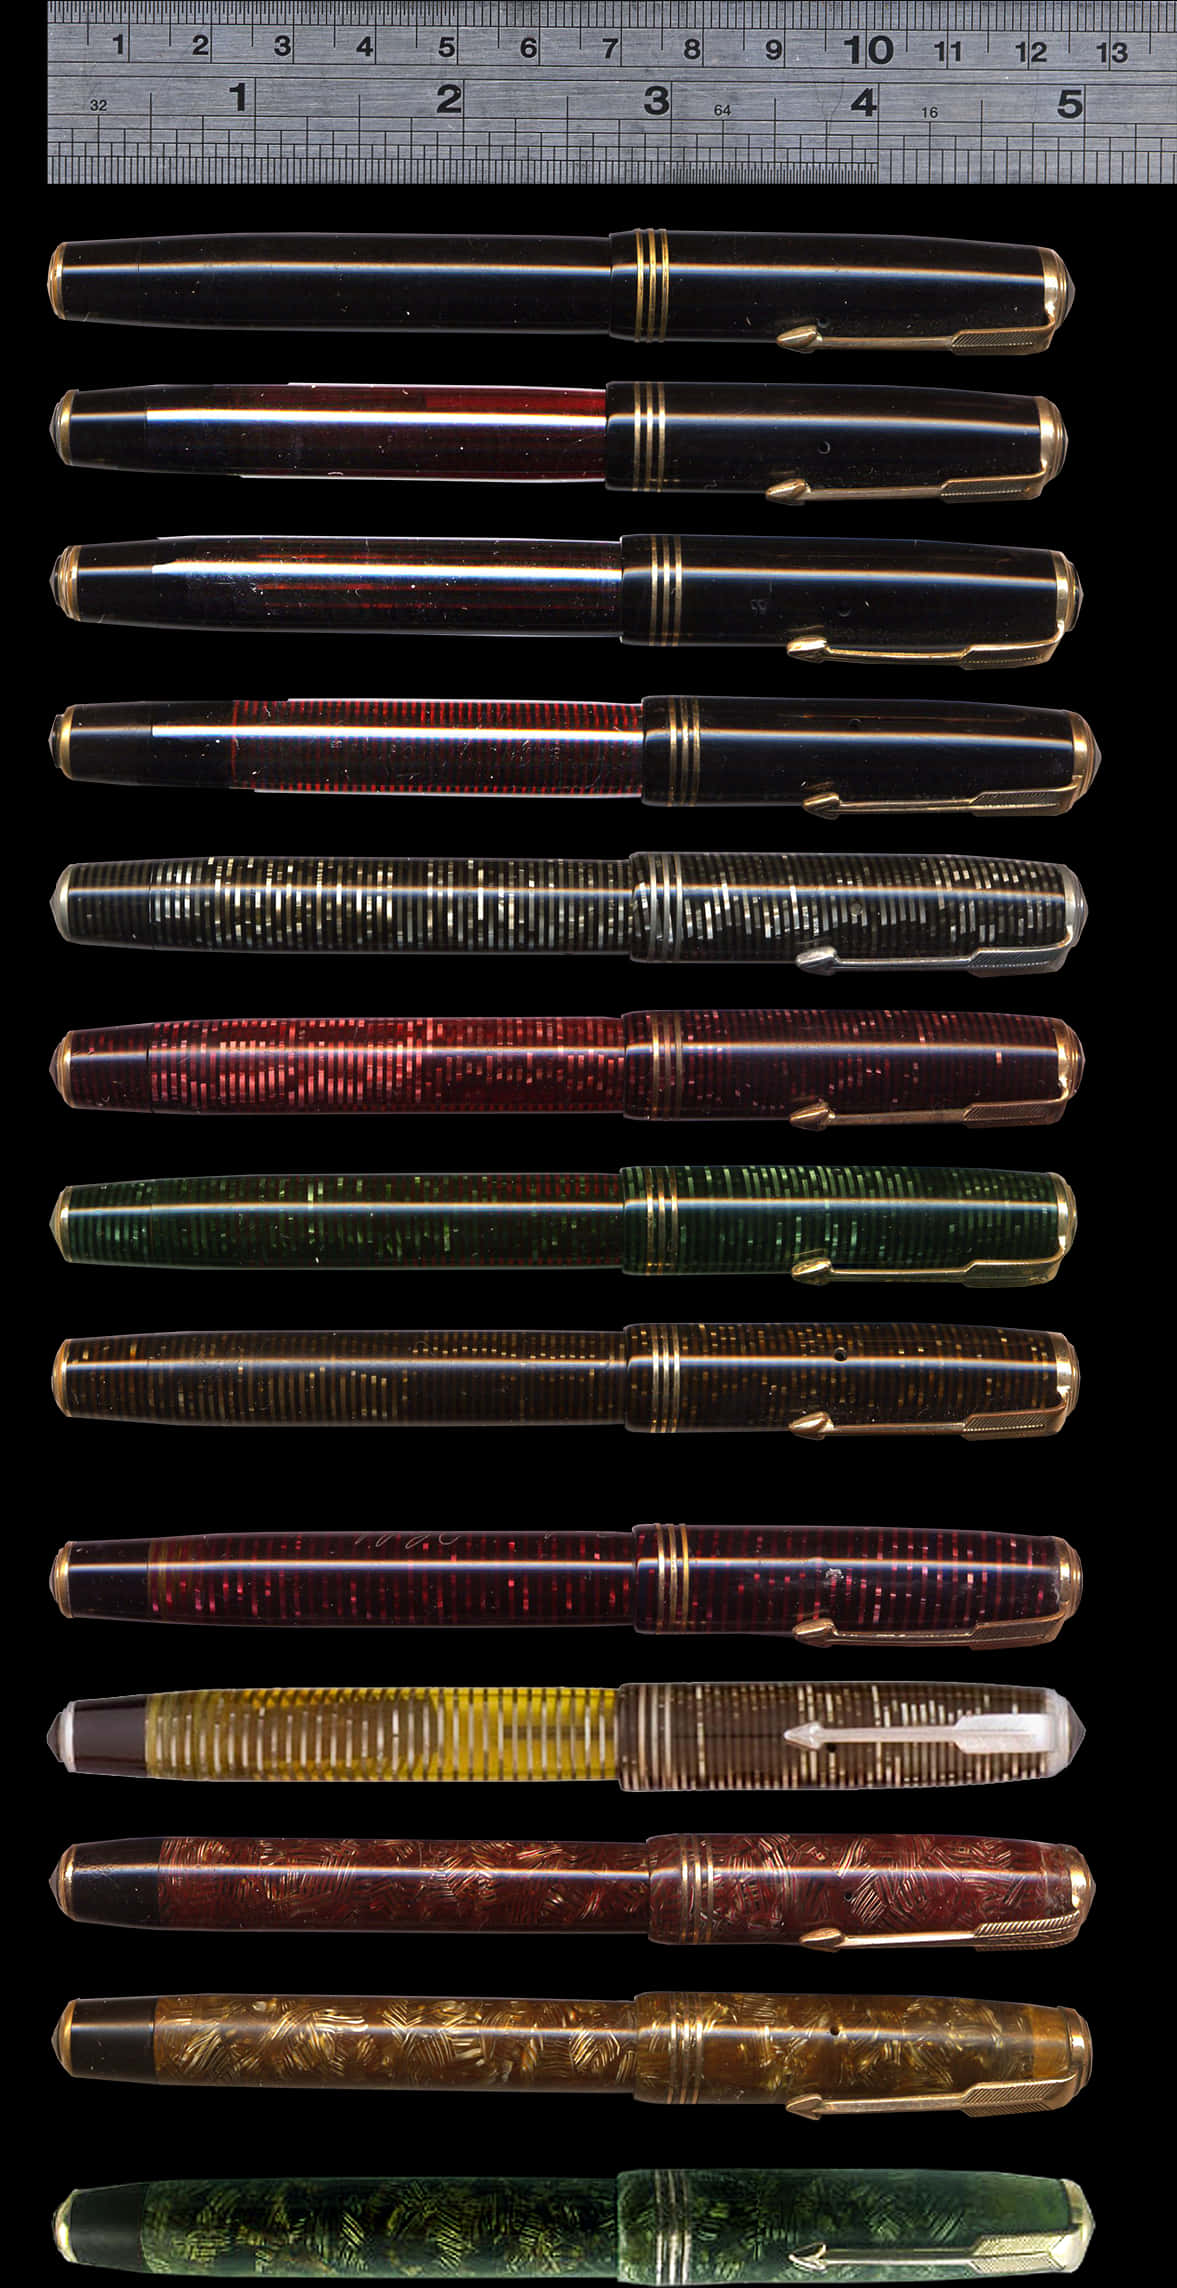 Vintage Fountain Pen Collection PNG